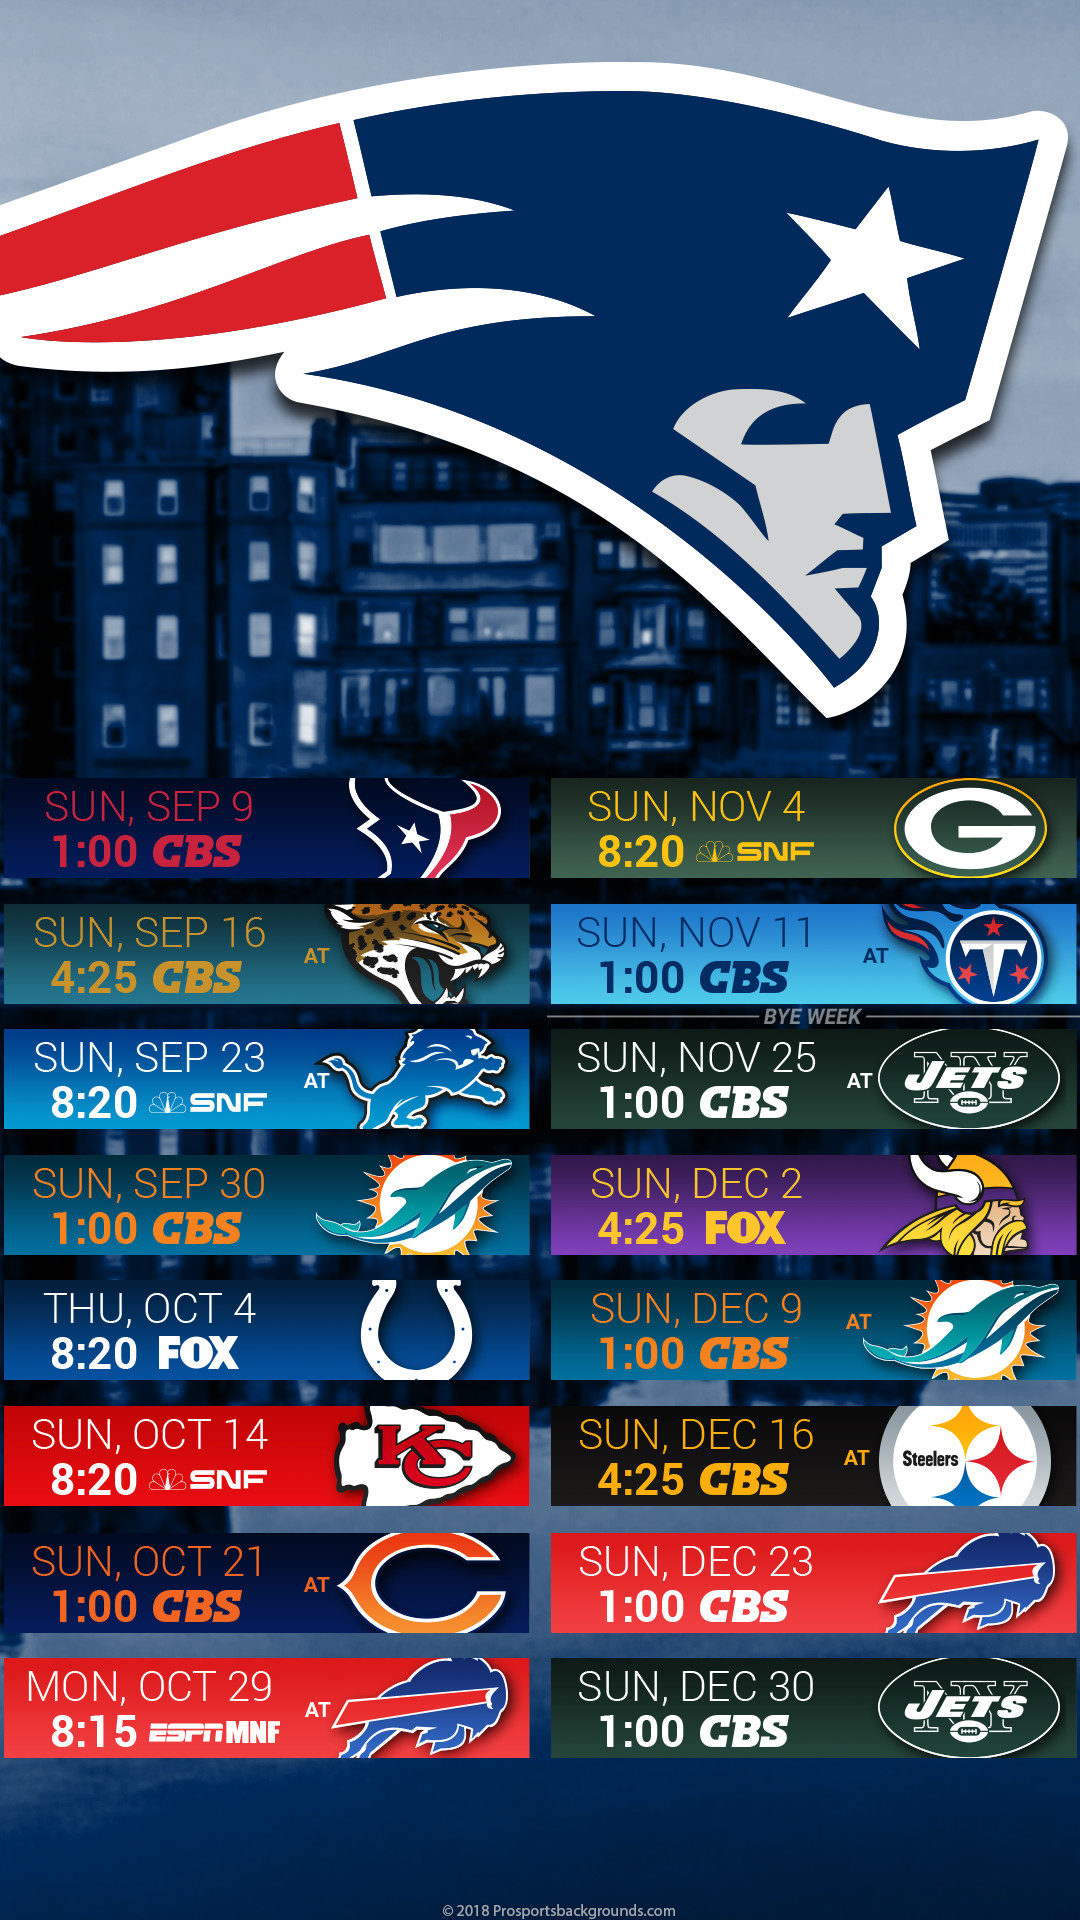 1080x1920 New England Patriots 2018 schedule city logo wallpaper free for desktop pc  iphone galaxy and andriod